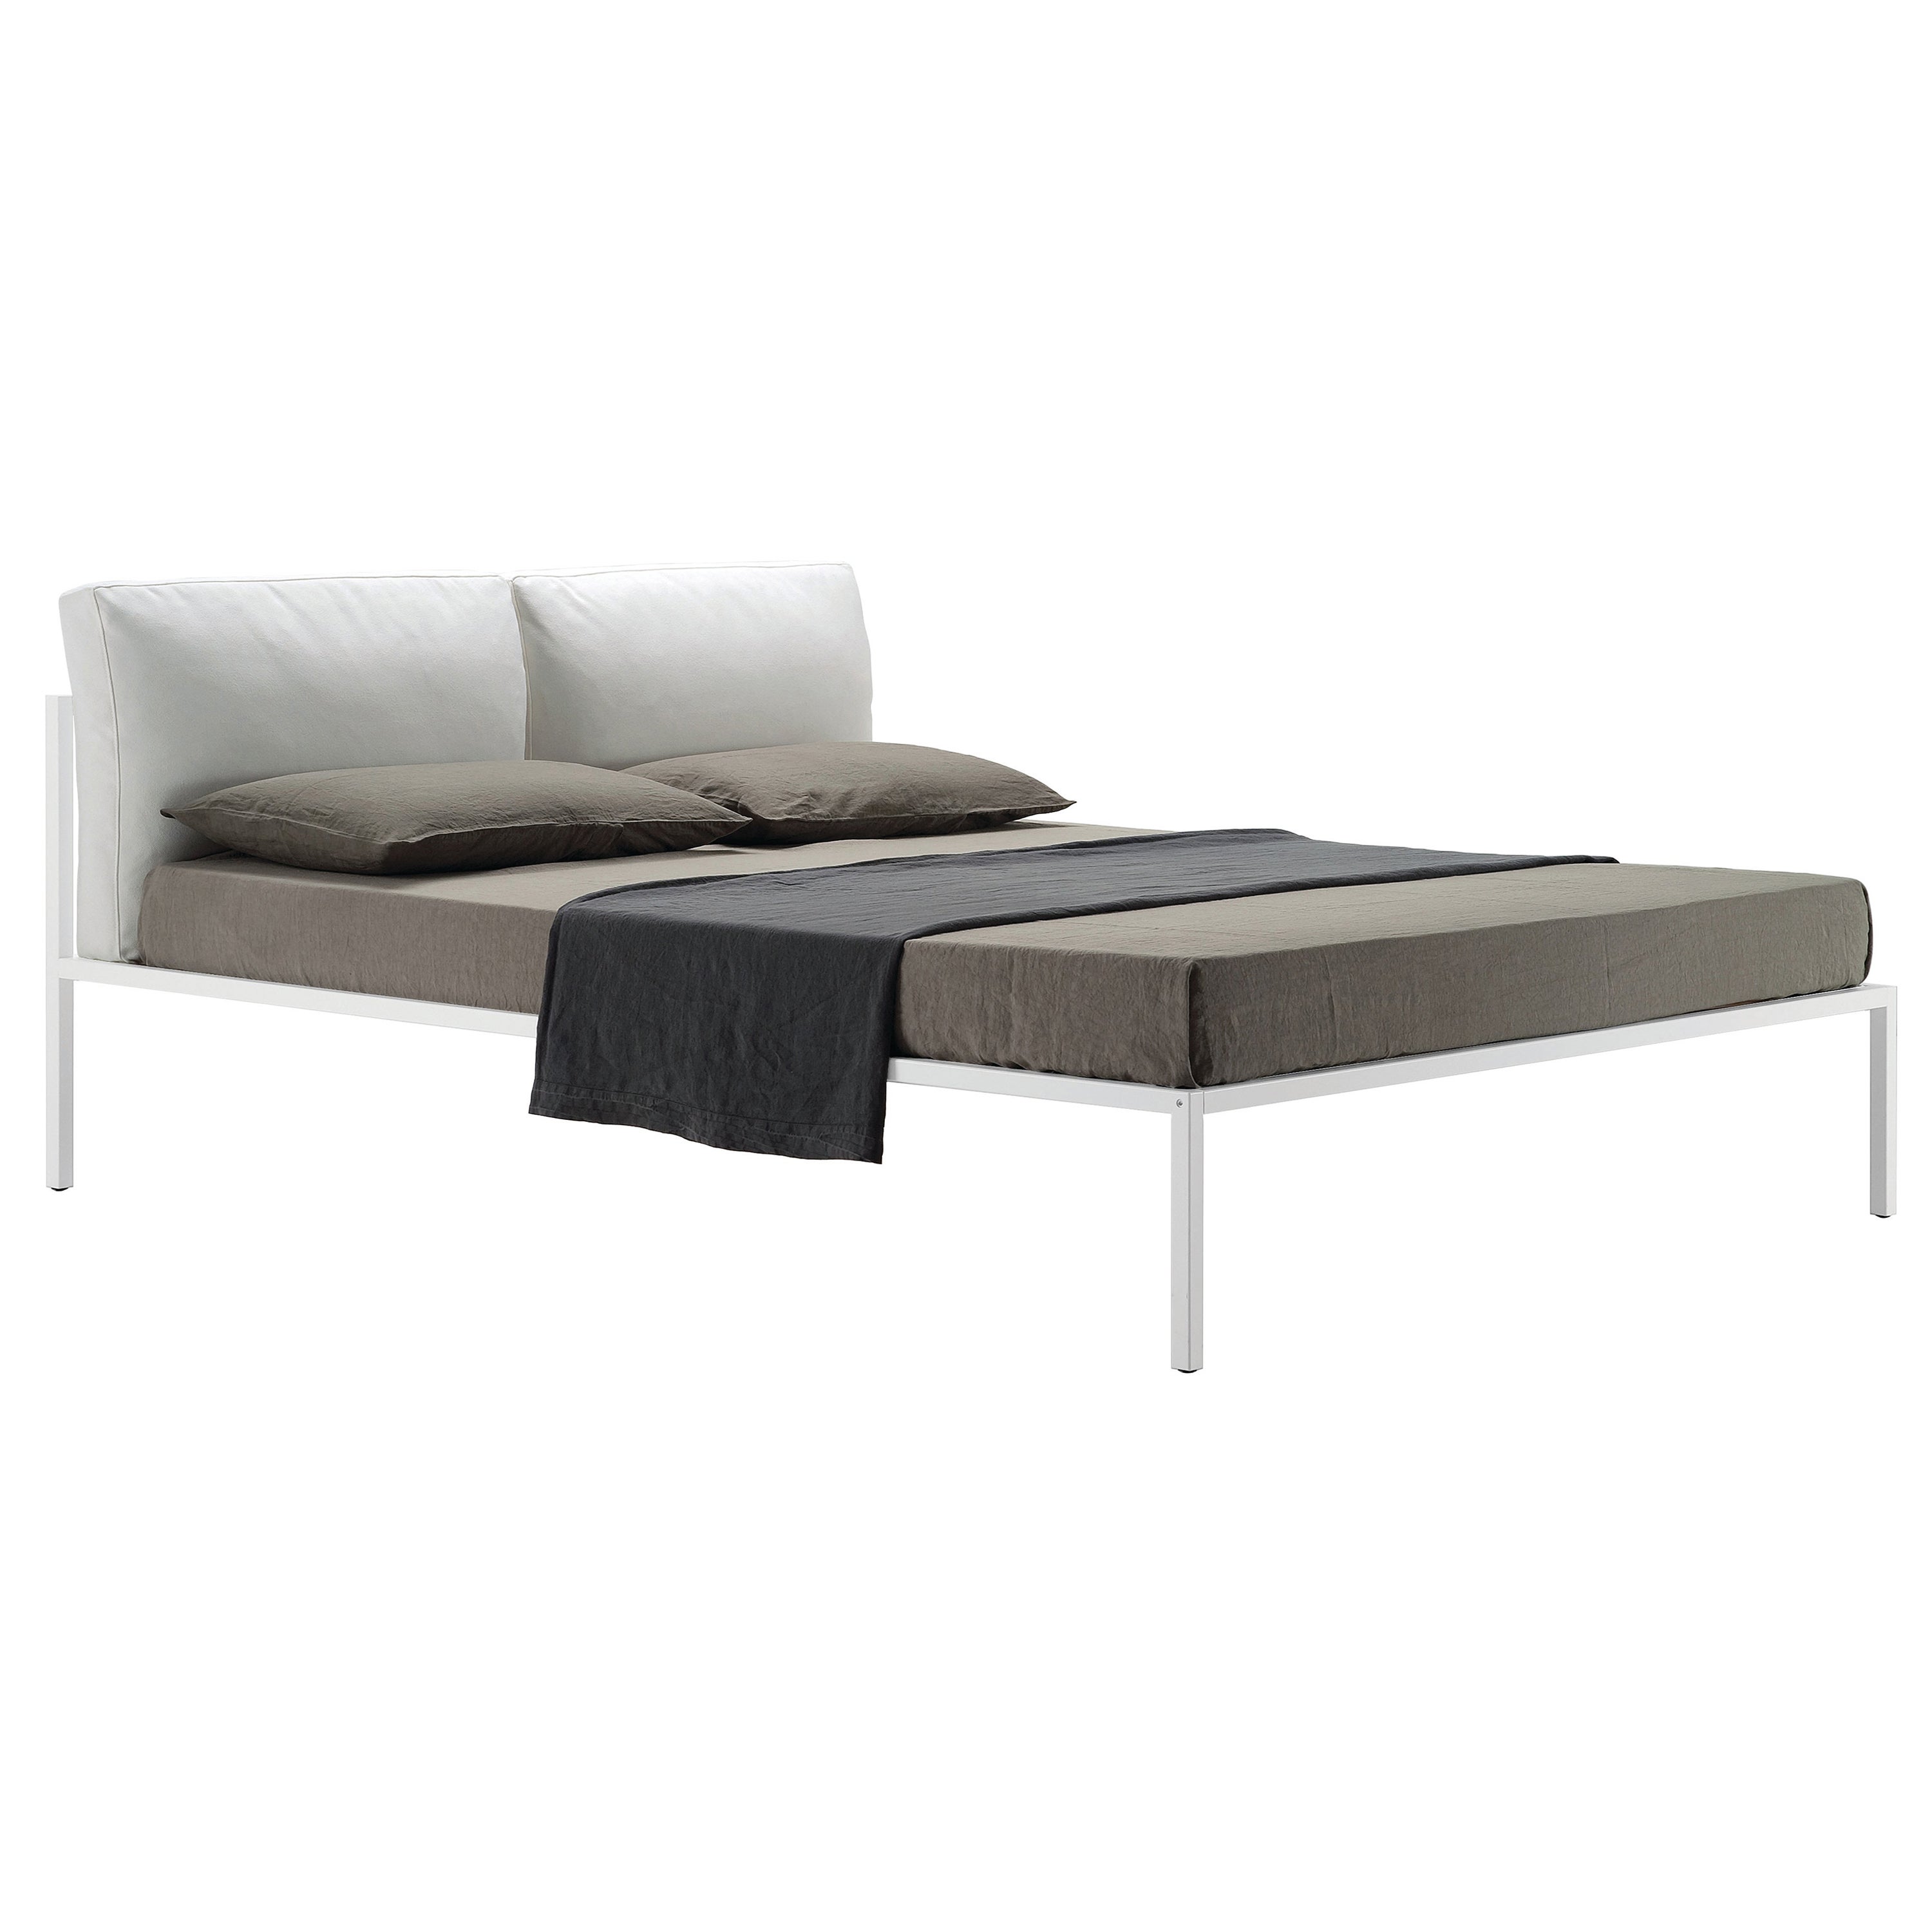 Zanotta King Size Nyx Bed in White Fabric with White Painted Steel Frame